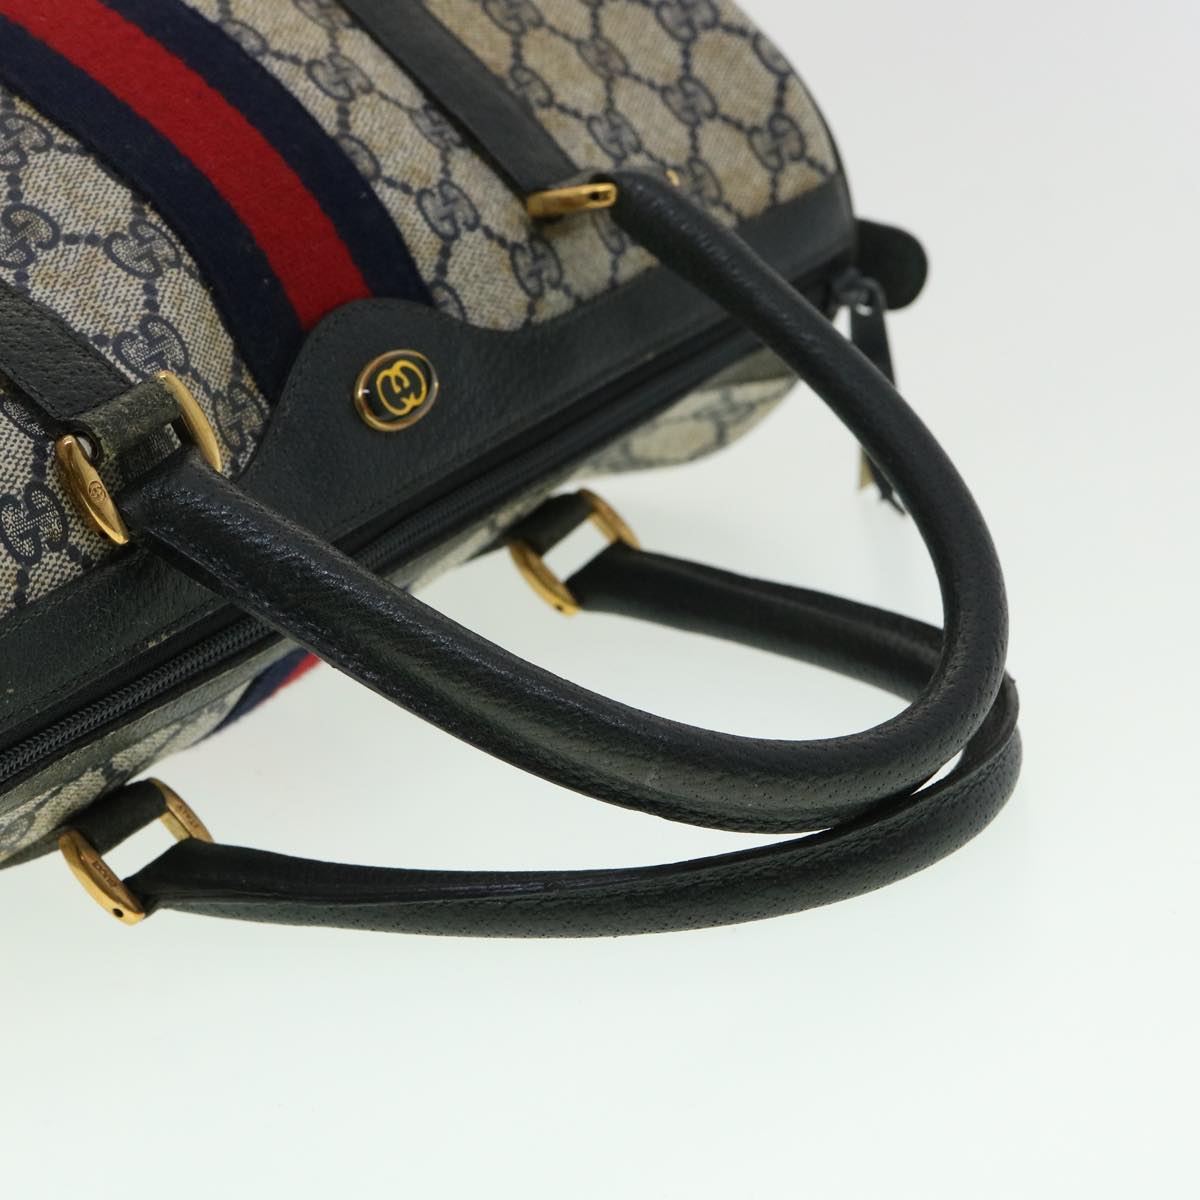 GUCCI GG Canvas Sherry Line Boston Bag PVC Leather Gray Red Navy Auth rd3671